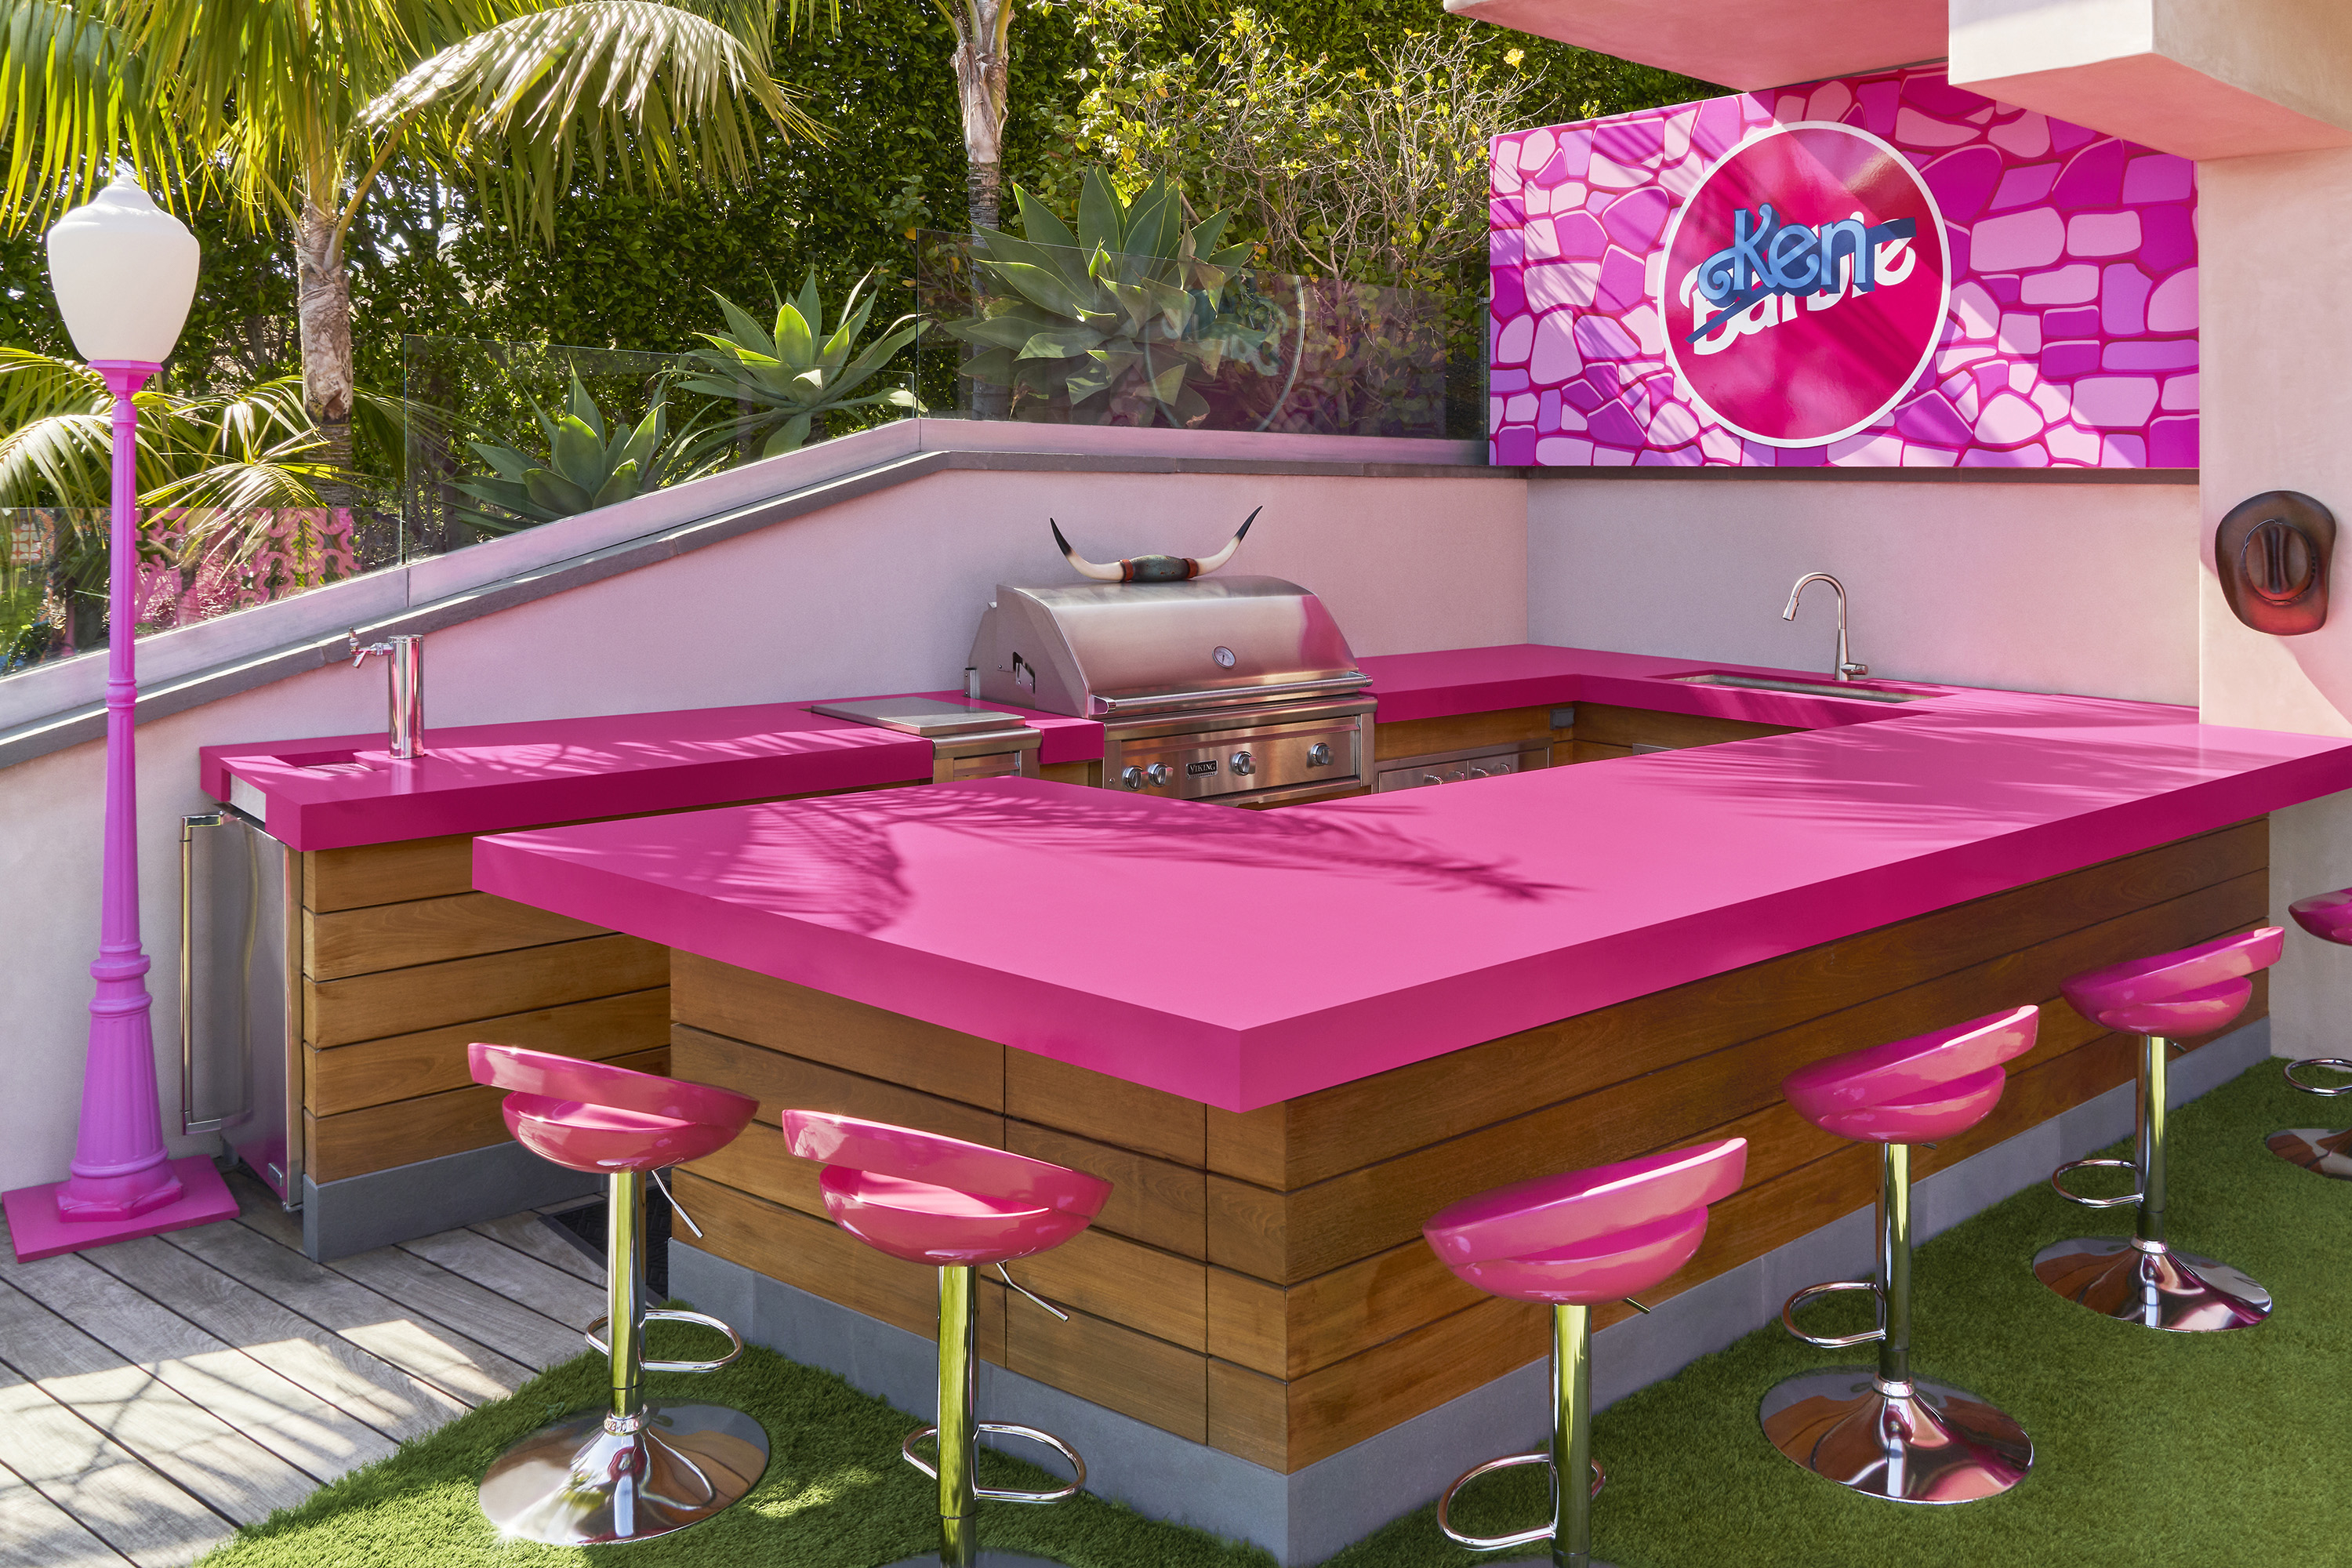 A ultra pink of a dining bar with a grill